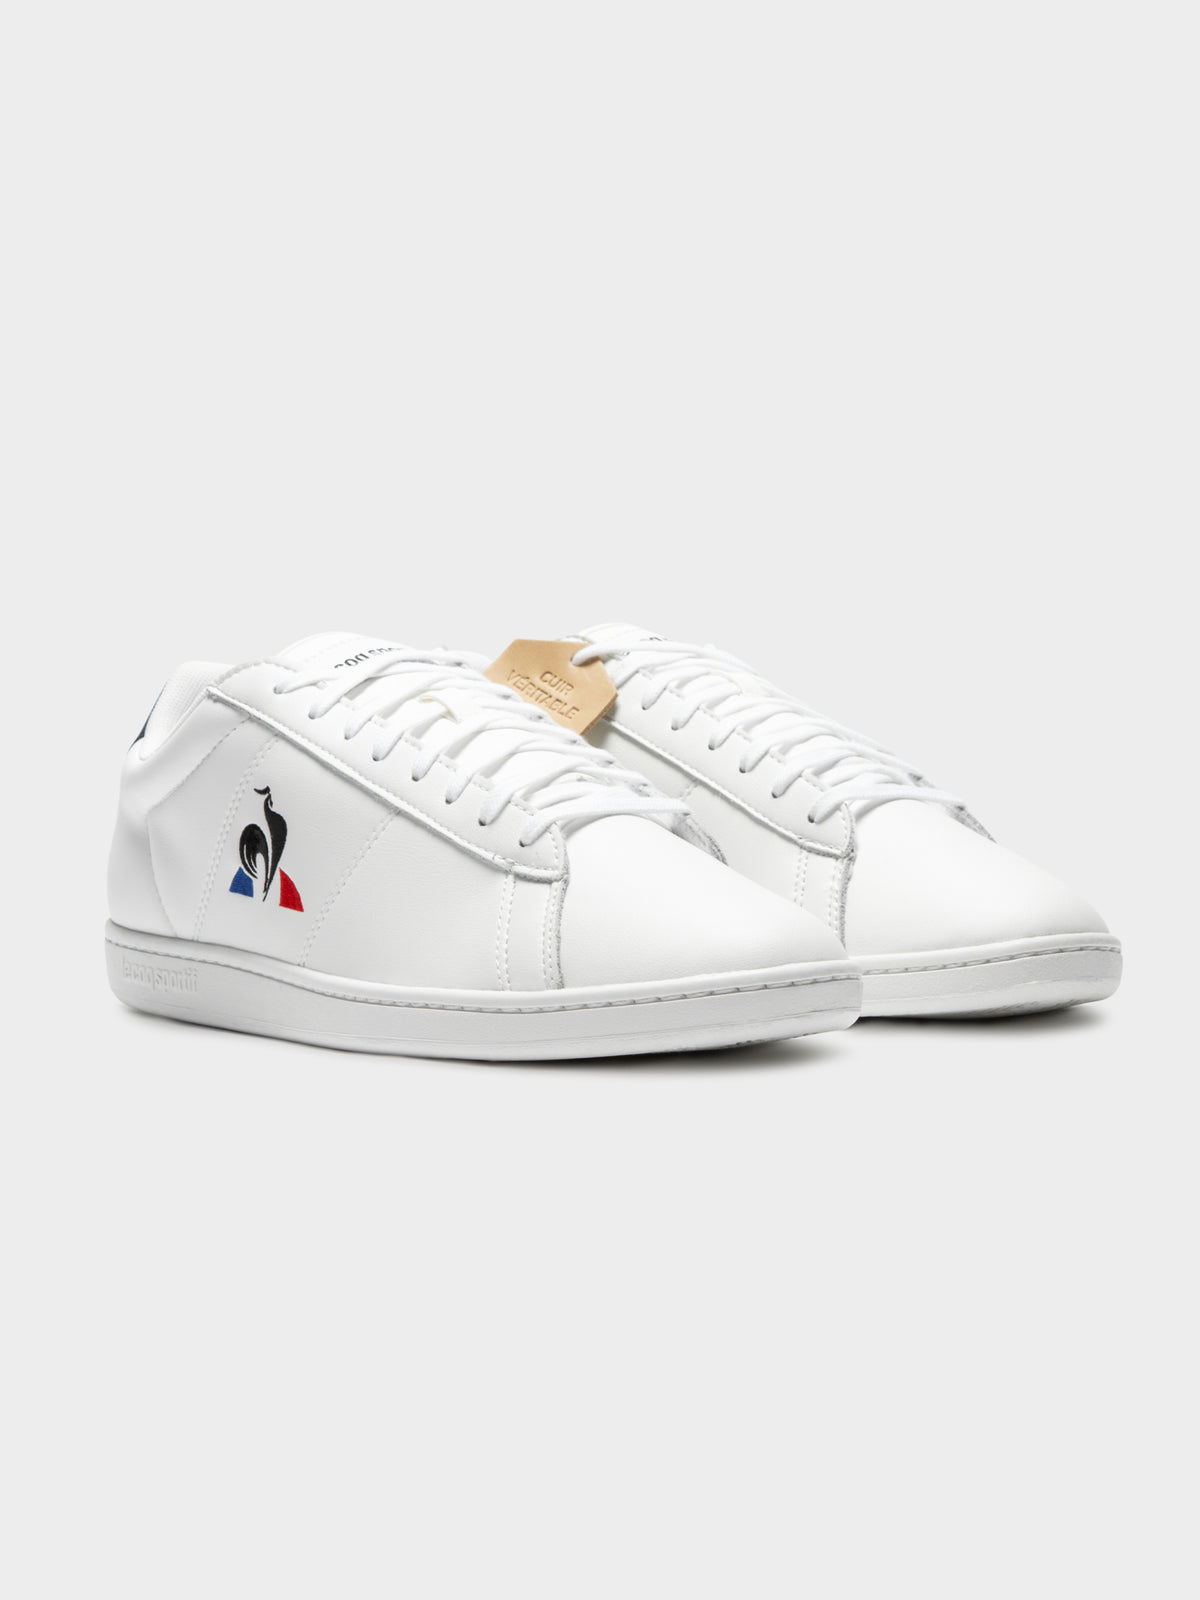 Mens Courtset Sneakers in White